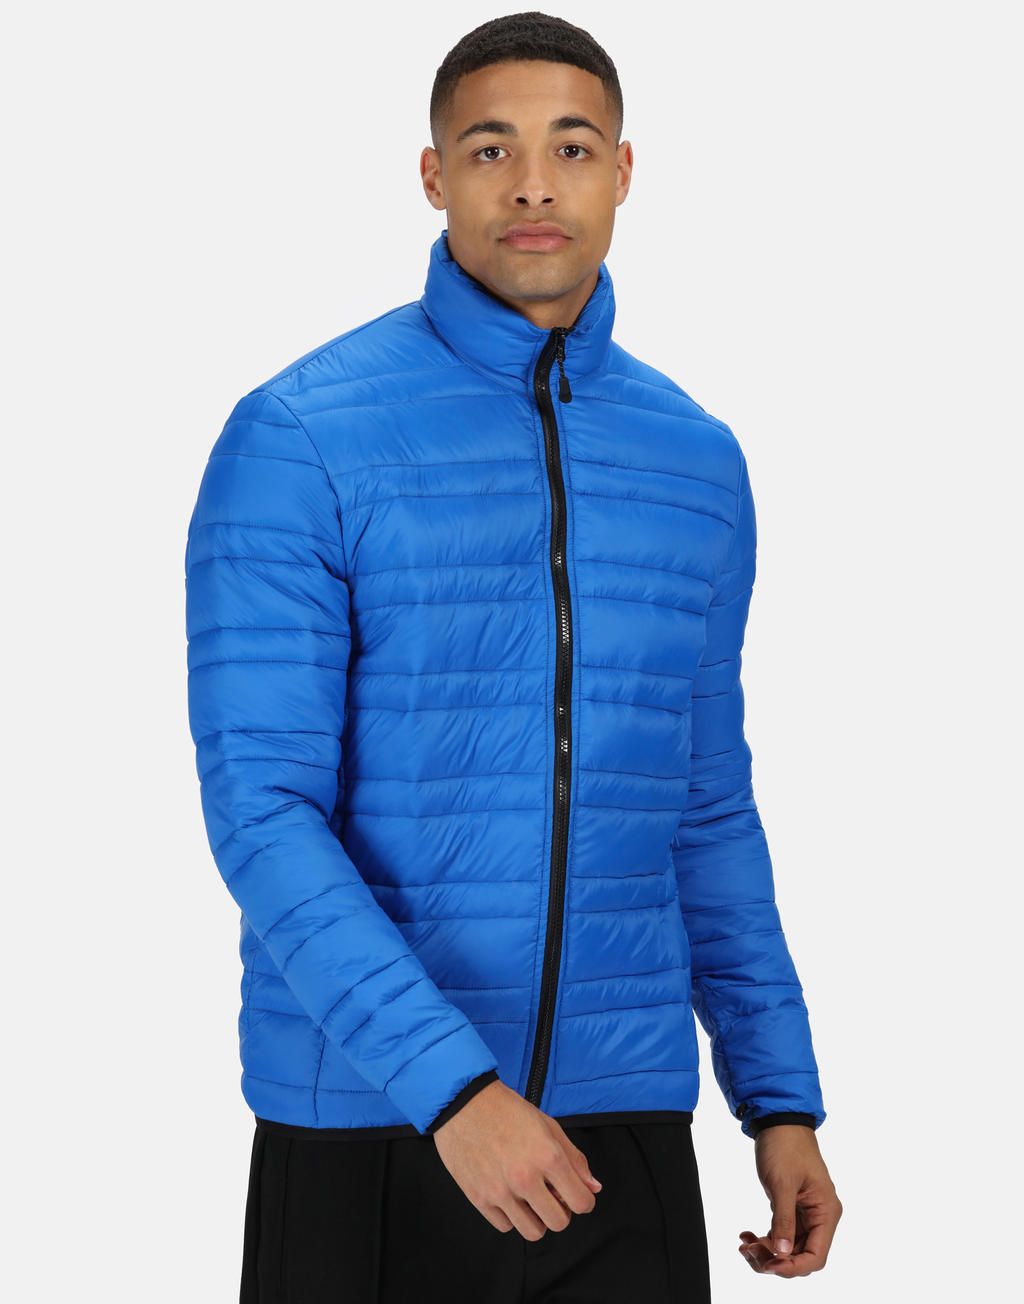  X-Pro Evader III 3 in1 Jacket in Farbe Black/Oxford Blue